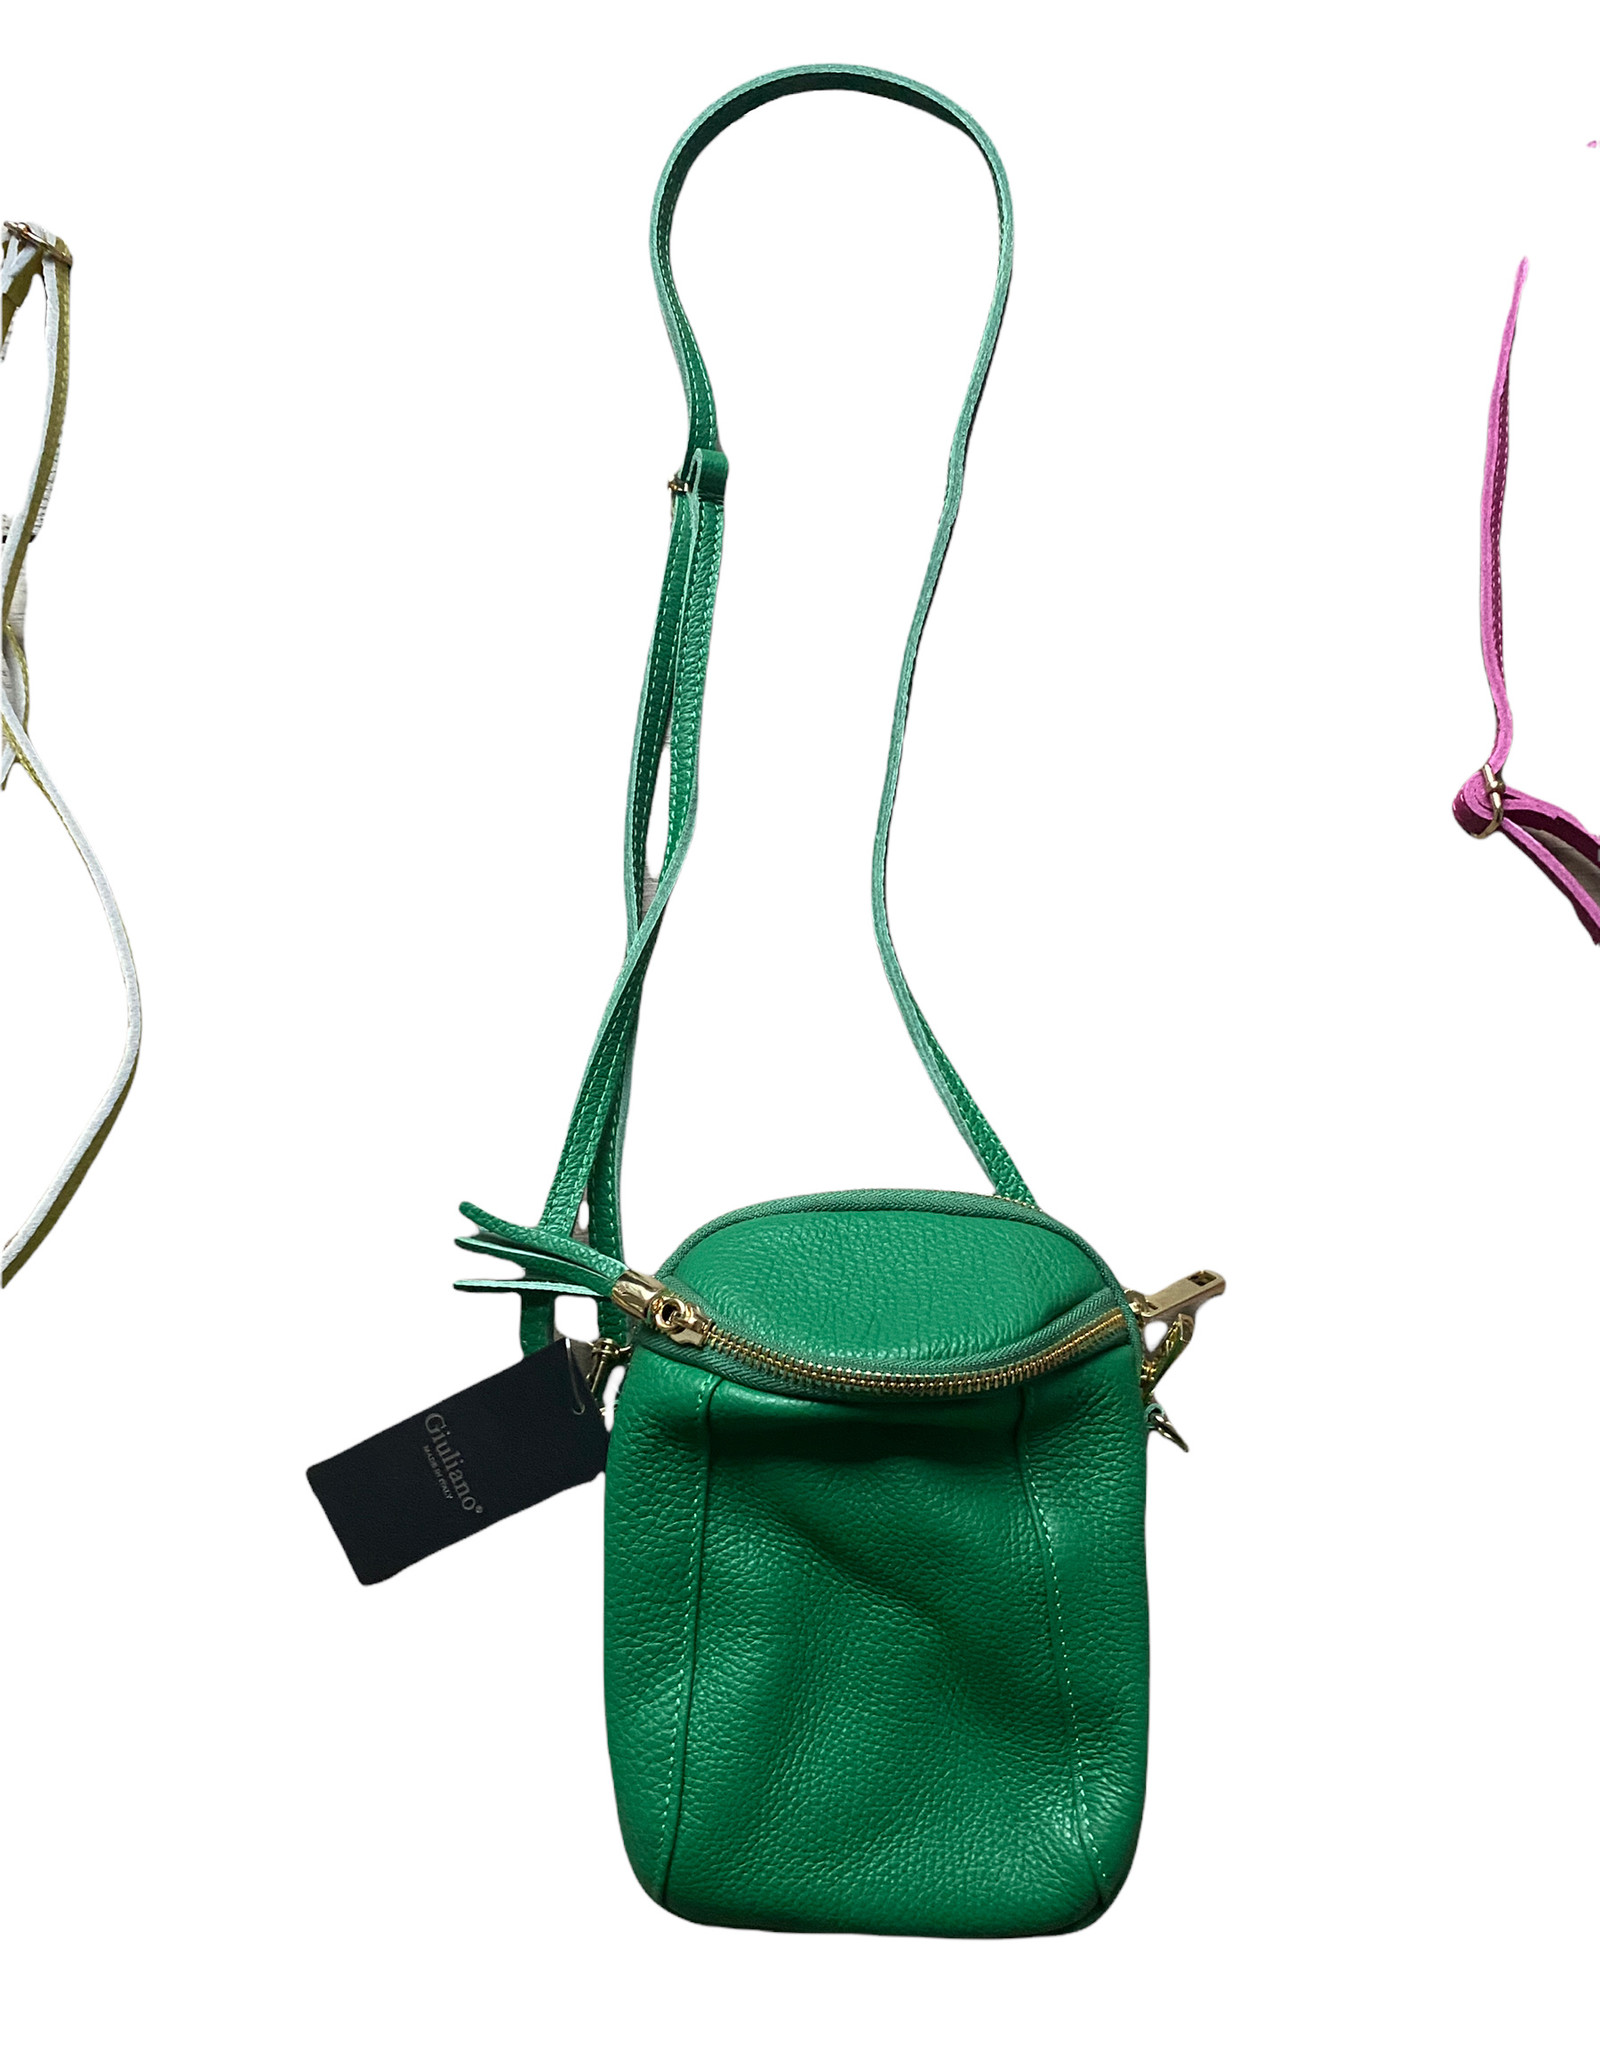 Little handy bags in several colors.